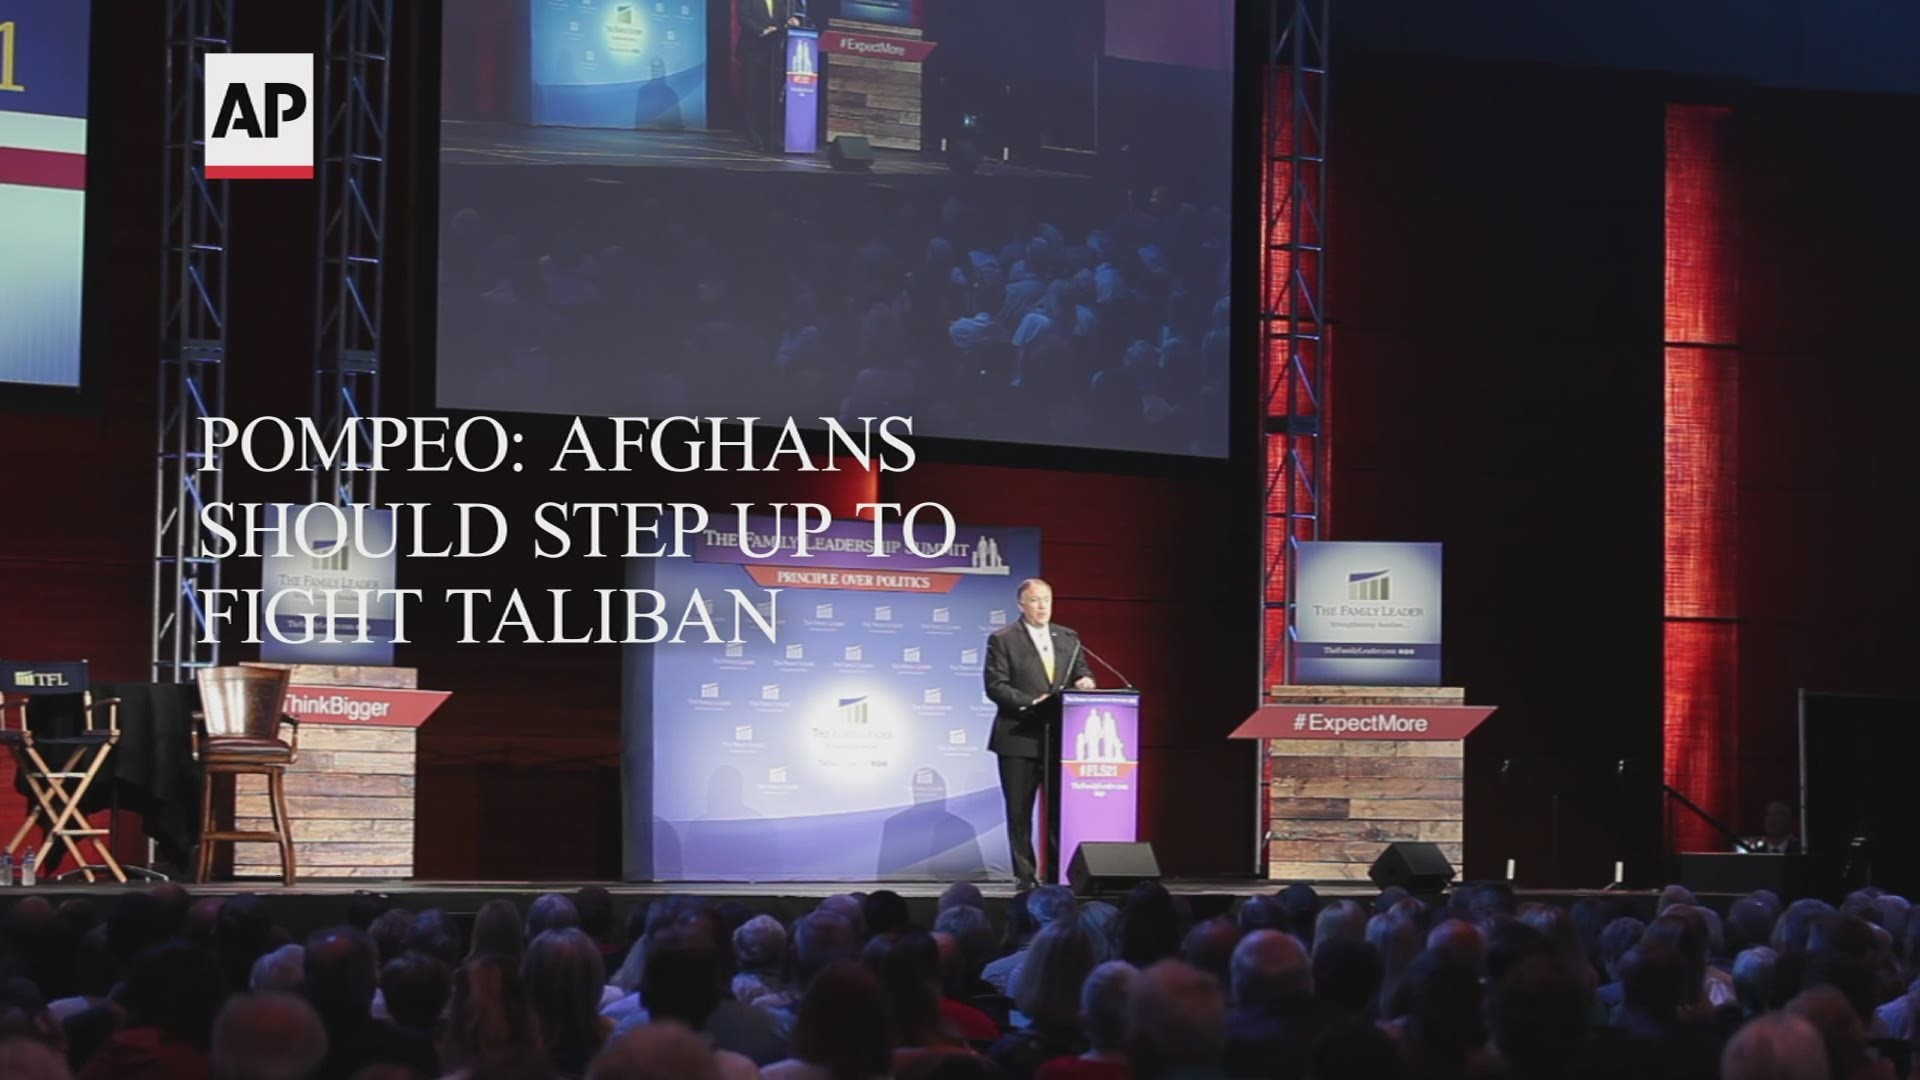 During a speaking tour in Des Moines on Friday, Former Secretary of State Mike Pompeo said the Afghan people should take up arms to fight the Taliban.